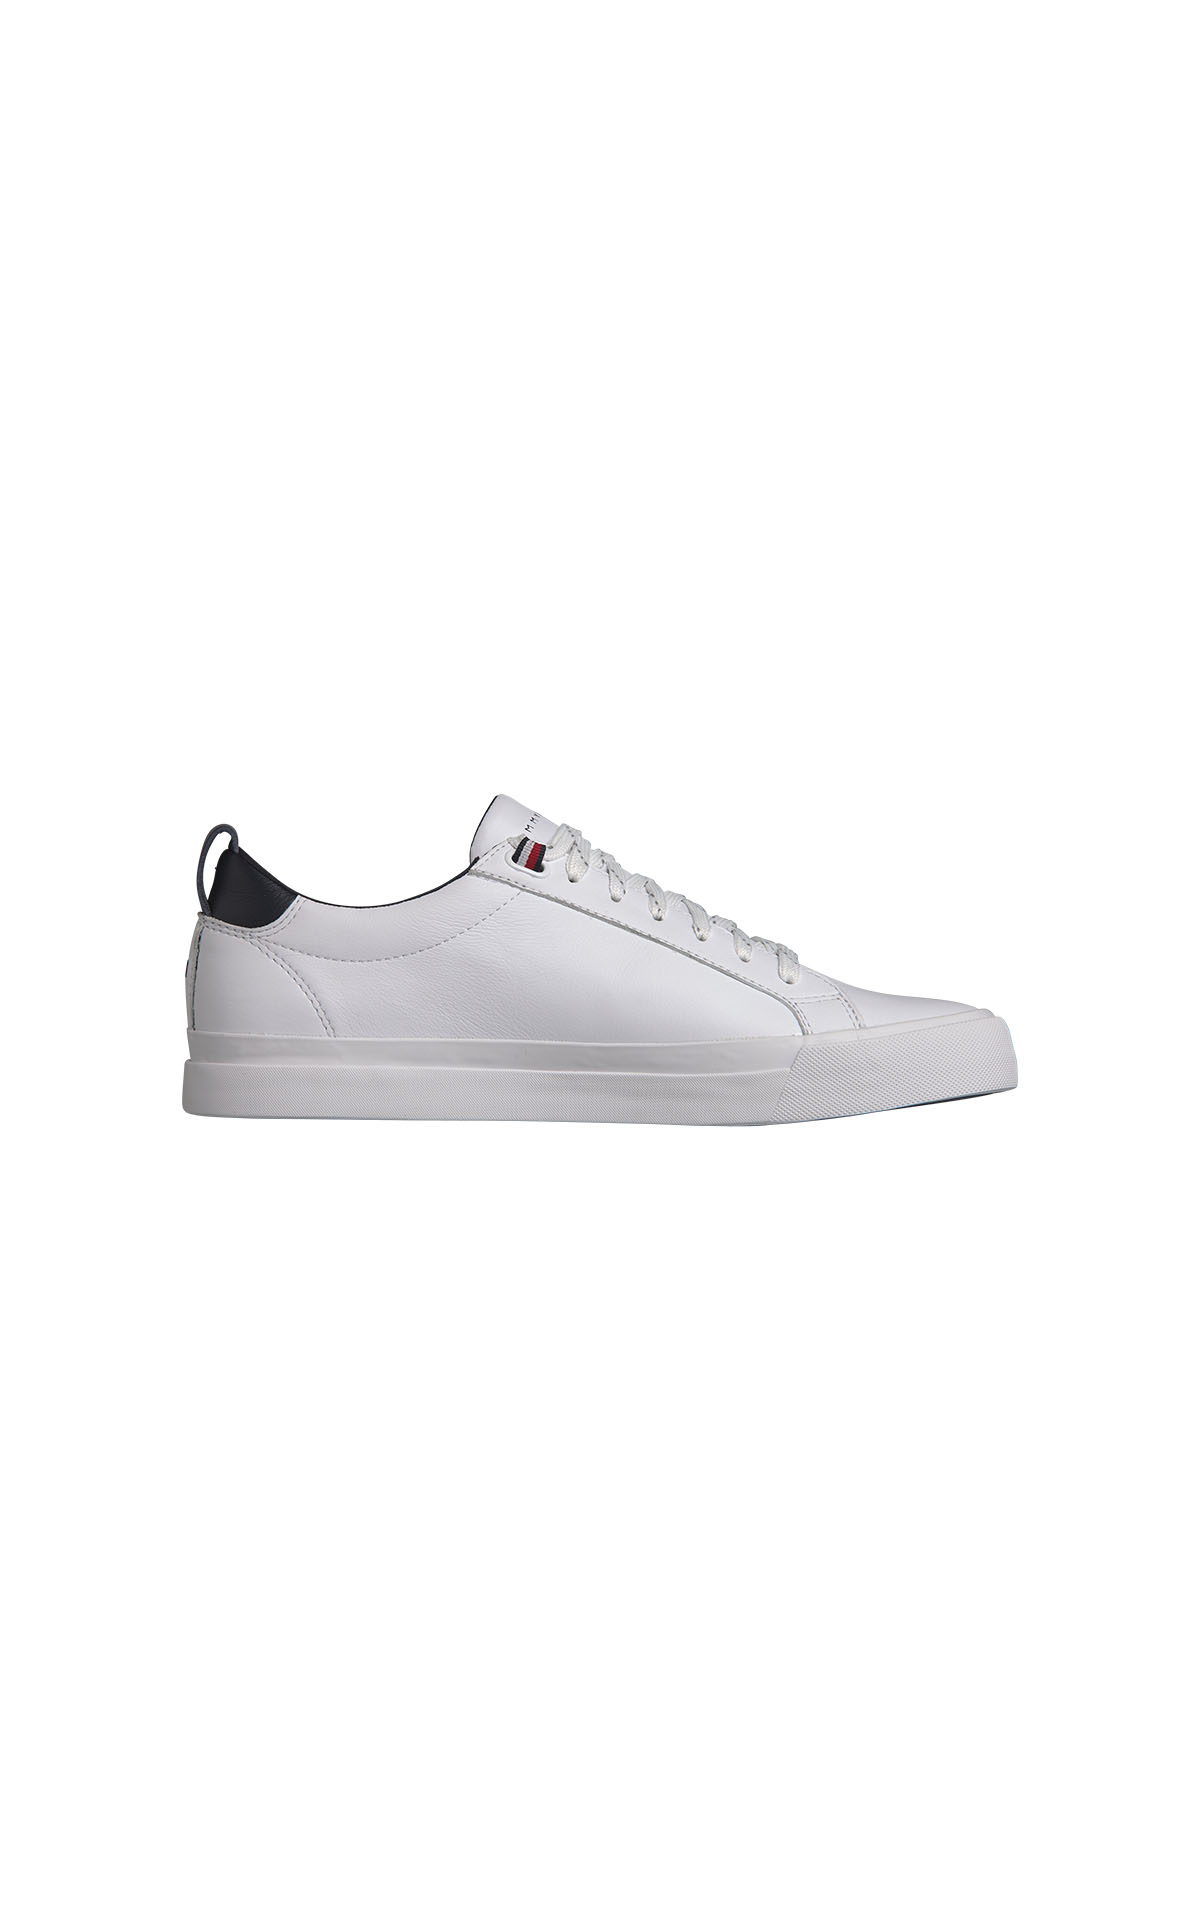 Dino corporate white sneaker Tommy Hilfiger